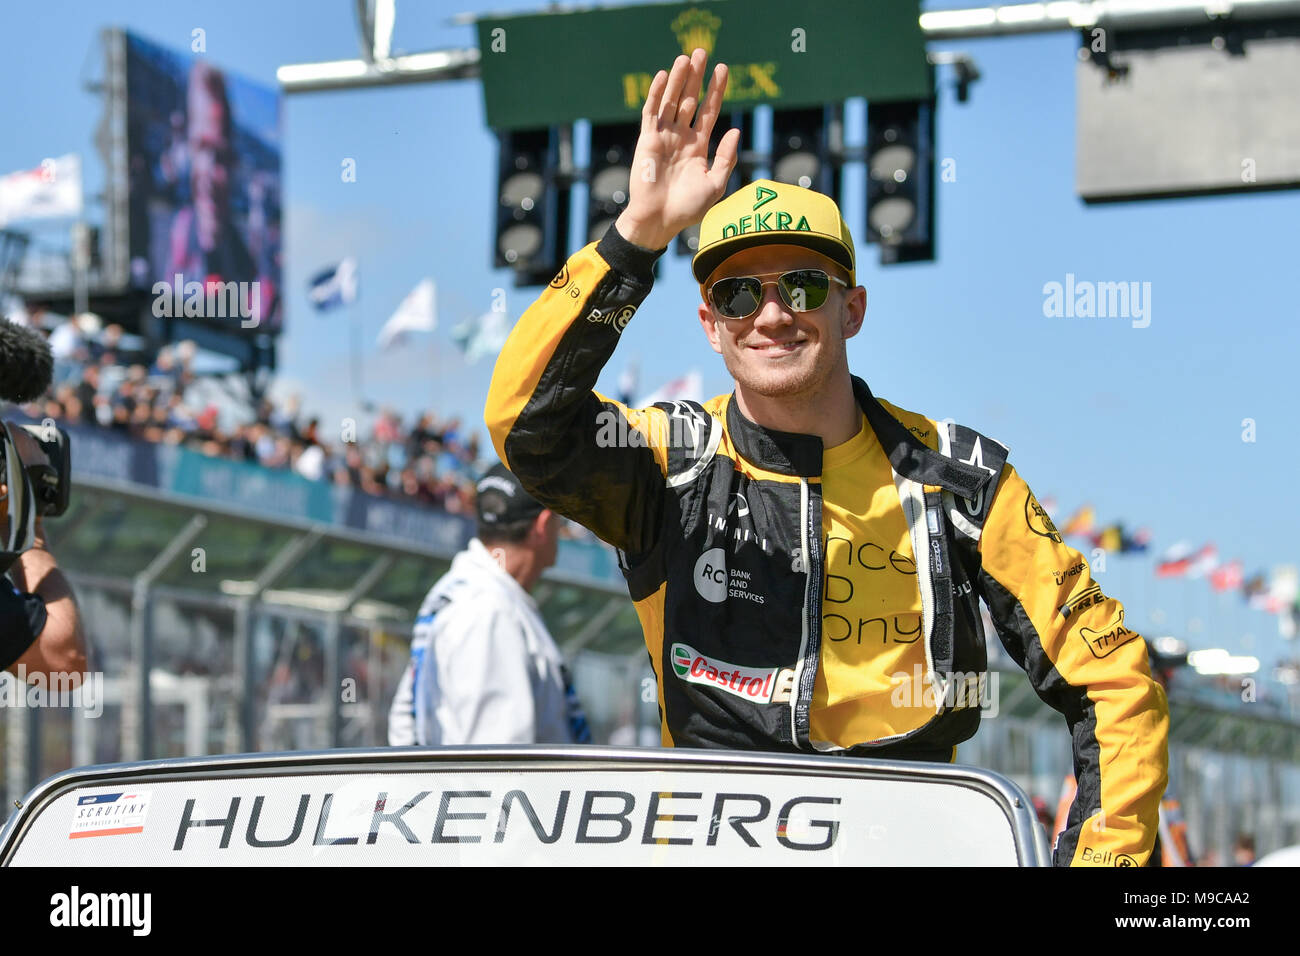 Albert Park, Melbourne, Australia. 25th Mar, 2018. Nico Hulkenberg (DEU) #27 from the Renault Sport F1 team waves to the crowd during the drivers' parade at the 2018 Australian Formula One Grand Prix at Albert Park, Melbourne, Australia. Sydney Low/Cal Sport Media/Alamy Live News Stock Photo